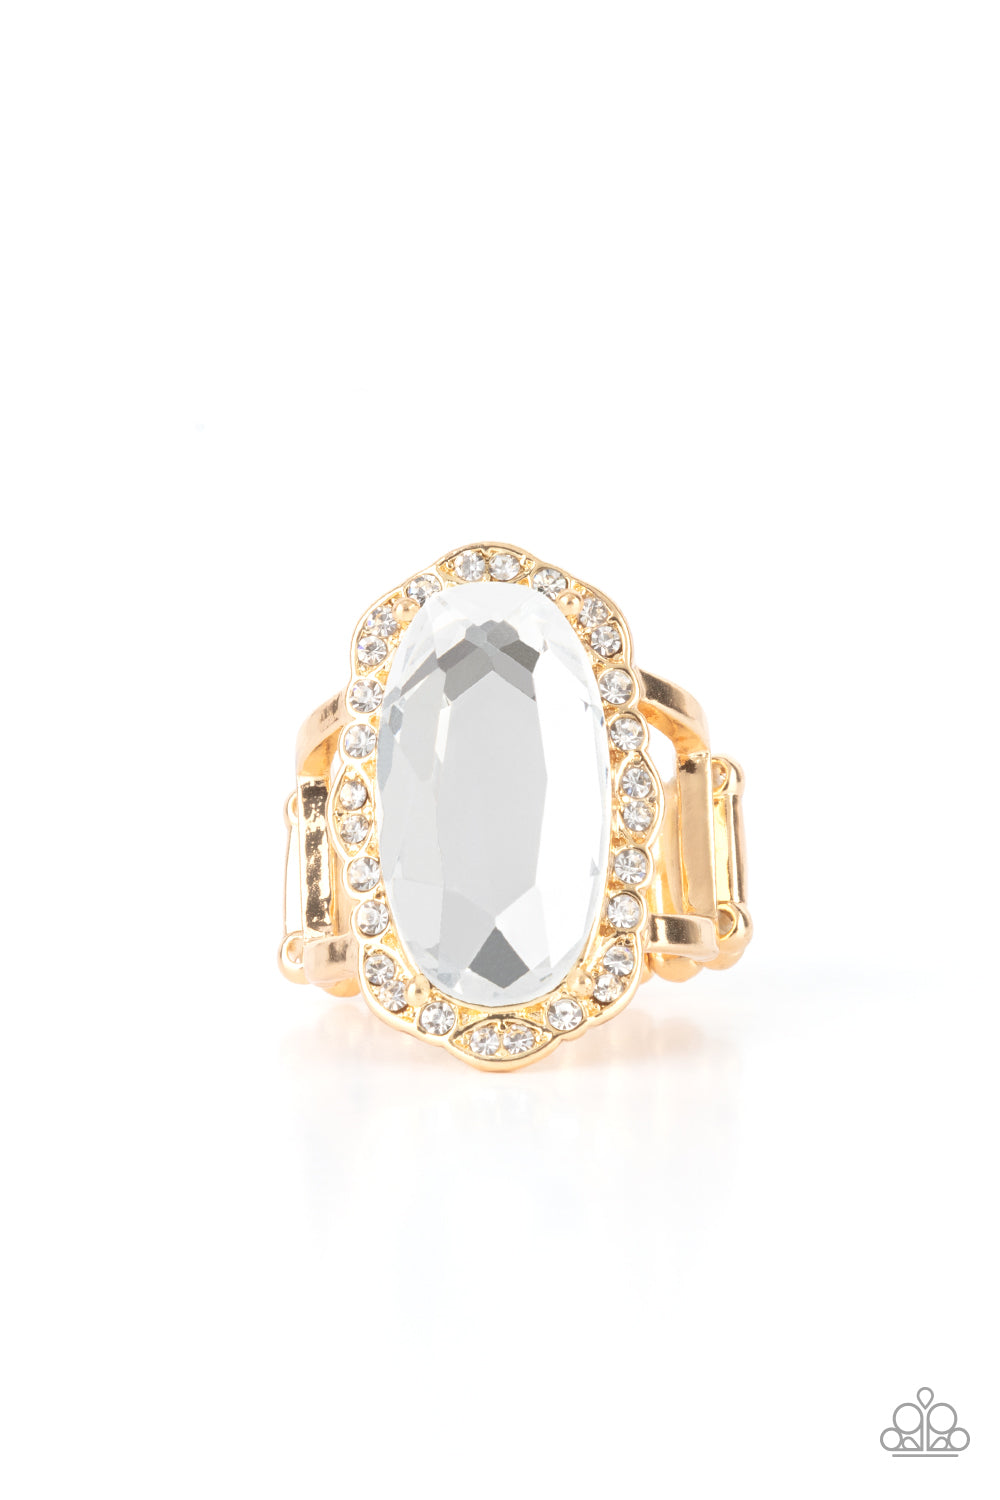 Life of the Party, ring, A dramatically oversized oval white gem adorns the center of a scalloped gold frame dusted in dainty white rhinestones, creating a commanding centerpiece atop the finger. Features a stretchy band for a flexible fit.  Sold as one individual ring.